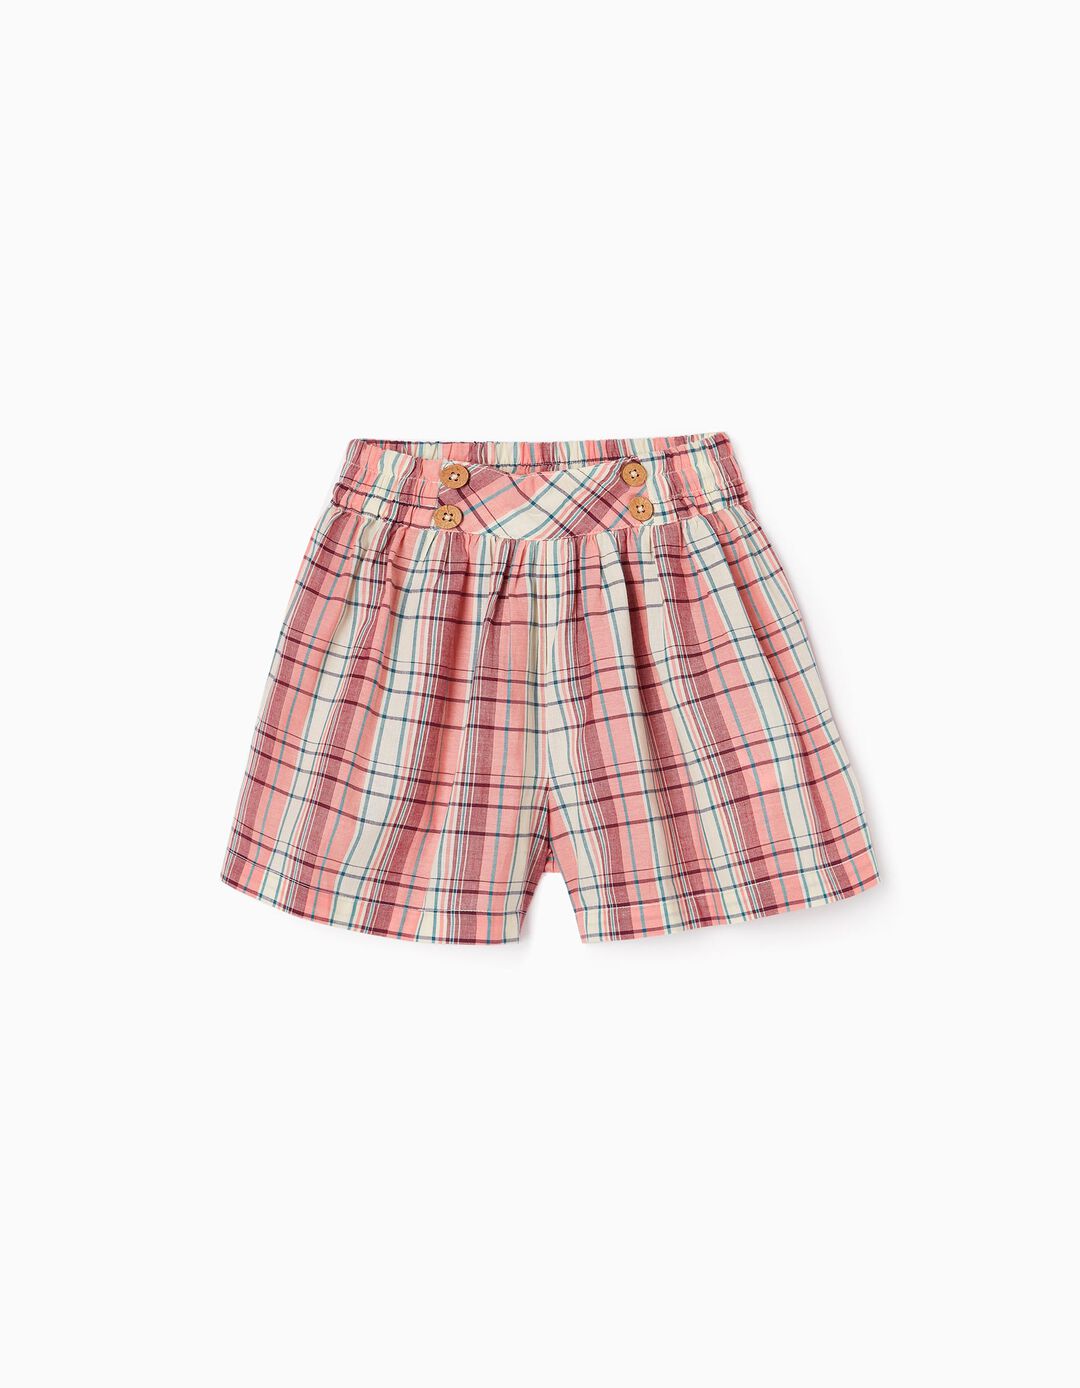 Plaid Cotton Shorts for Girls, Pink/Beige